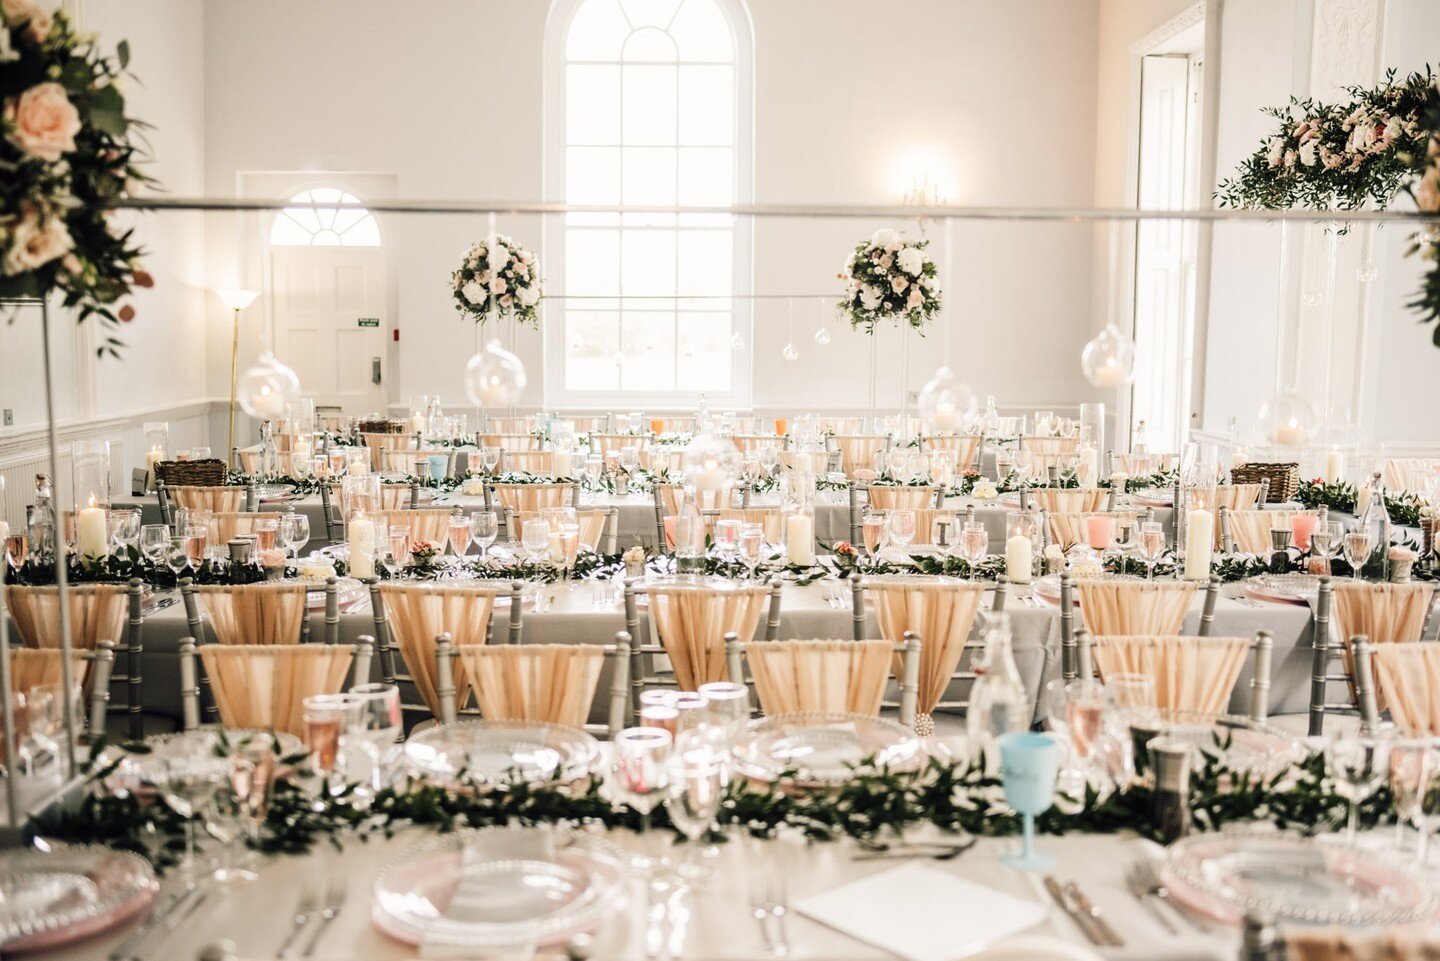 @SomerfordHall is an elegant Palladian mansion set amongst 100 acres of landscaped parkland in Staffordshire. What a stunning wedding breakfast! ⁠